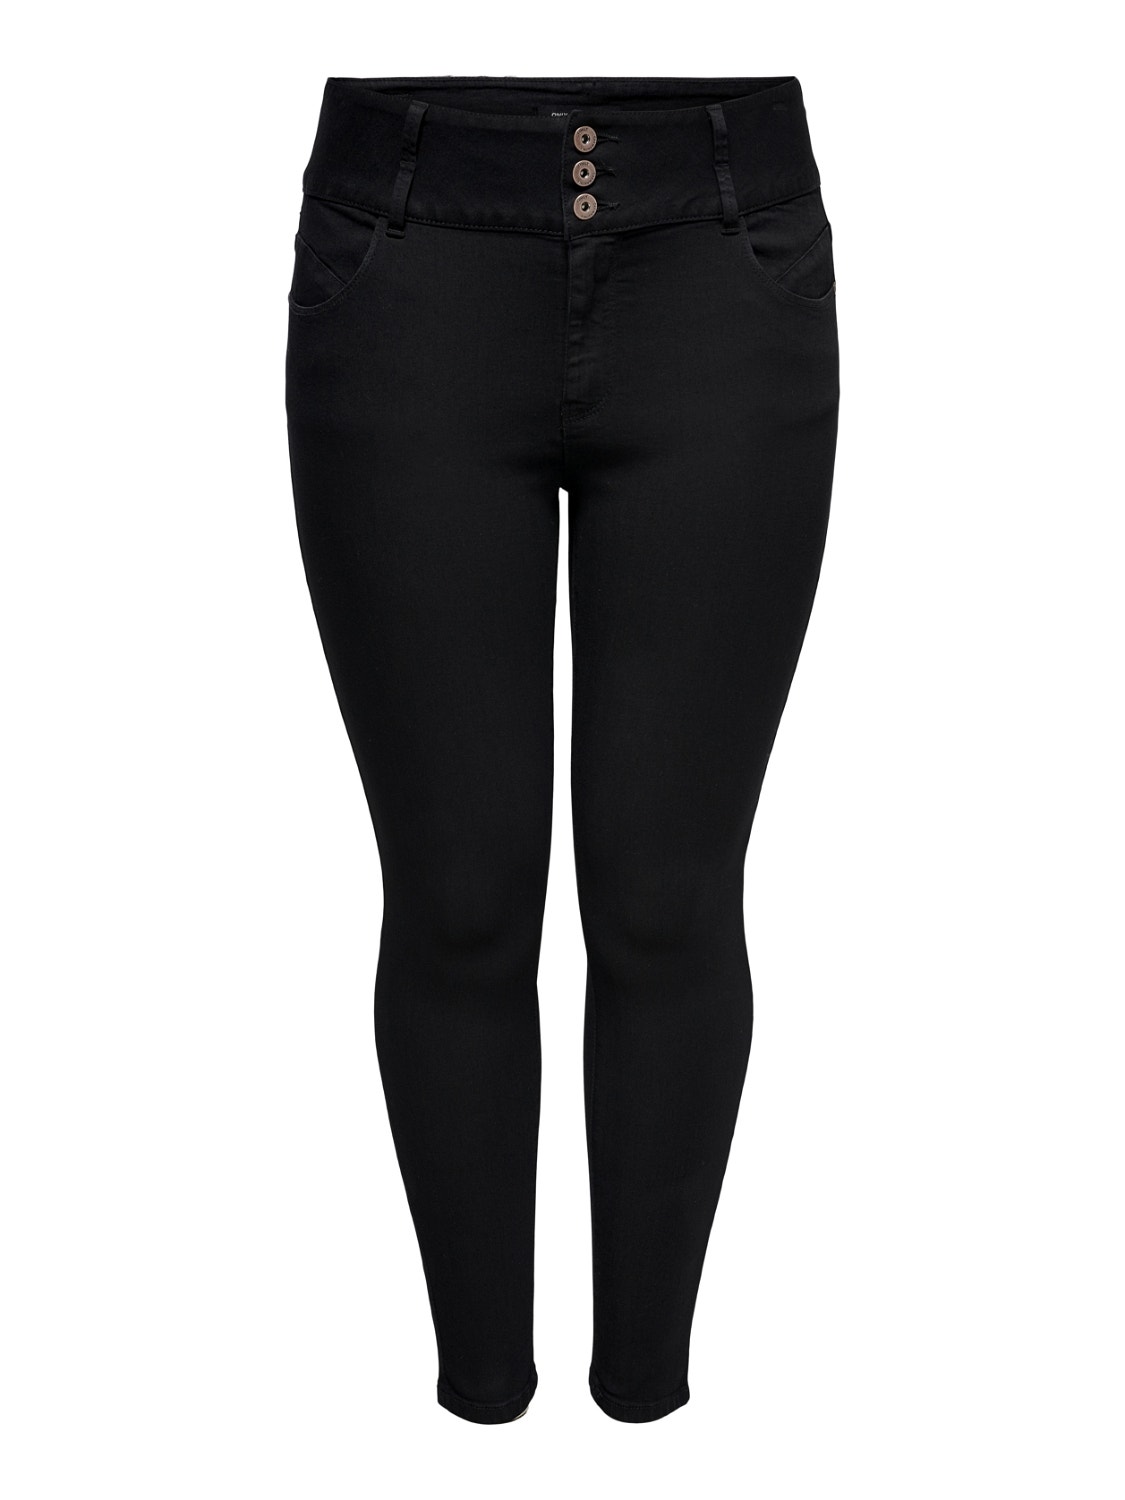 ONLY Skinny Fit High waist Jeans -Black - 15164131